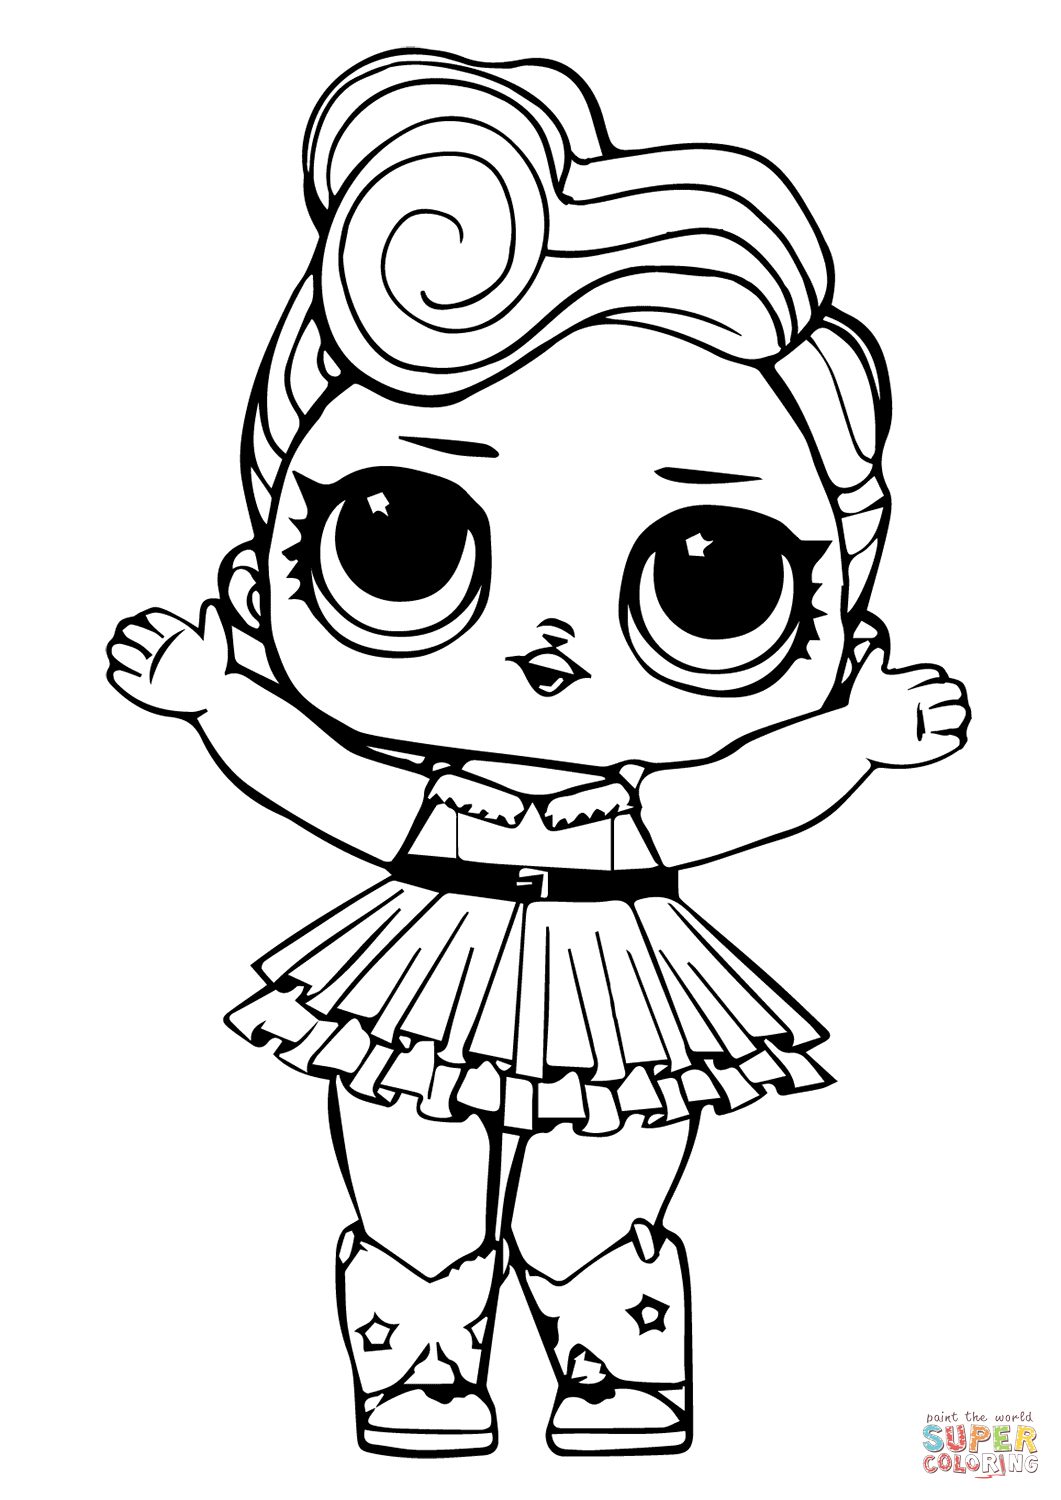 Lol Doll Luxe Coloring Page | Free Printable Coloring Pages | Lol - Free Printable Coloring Pages For Girls